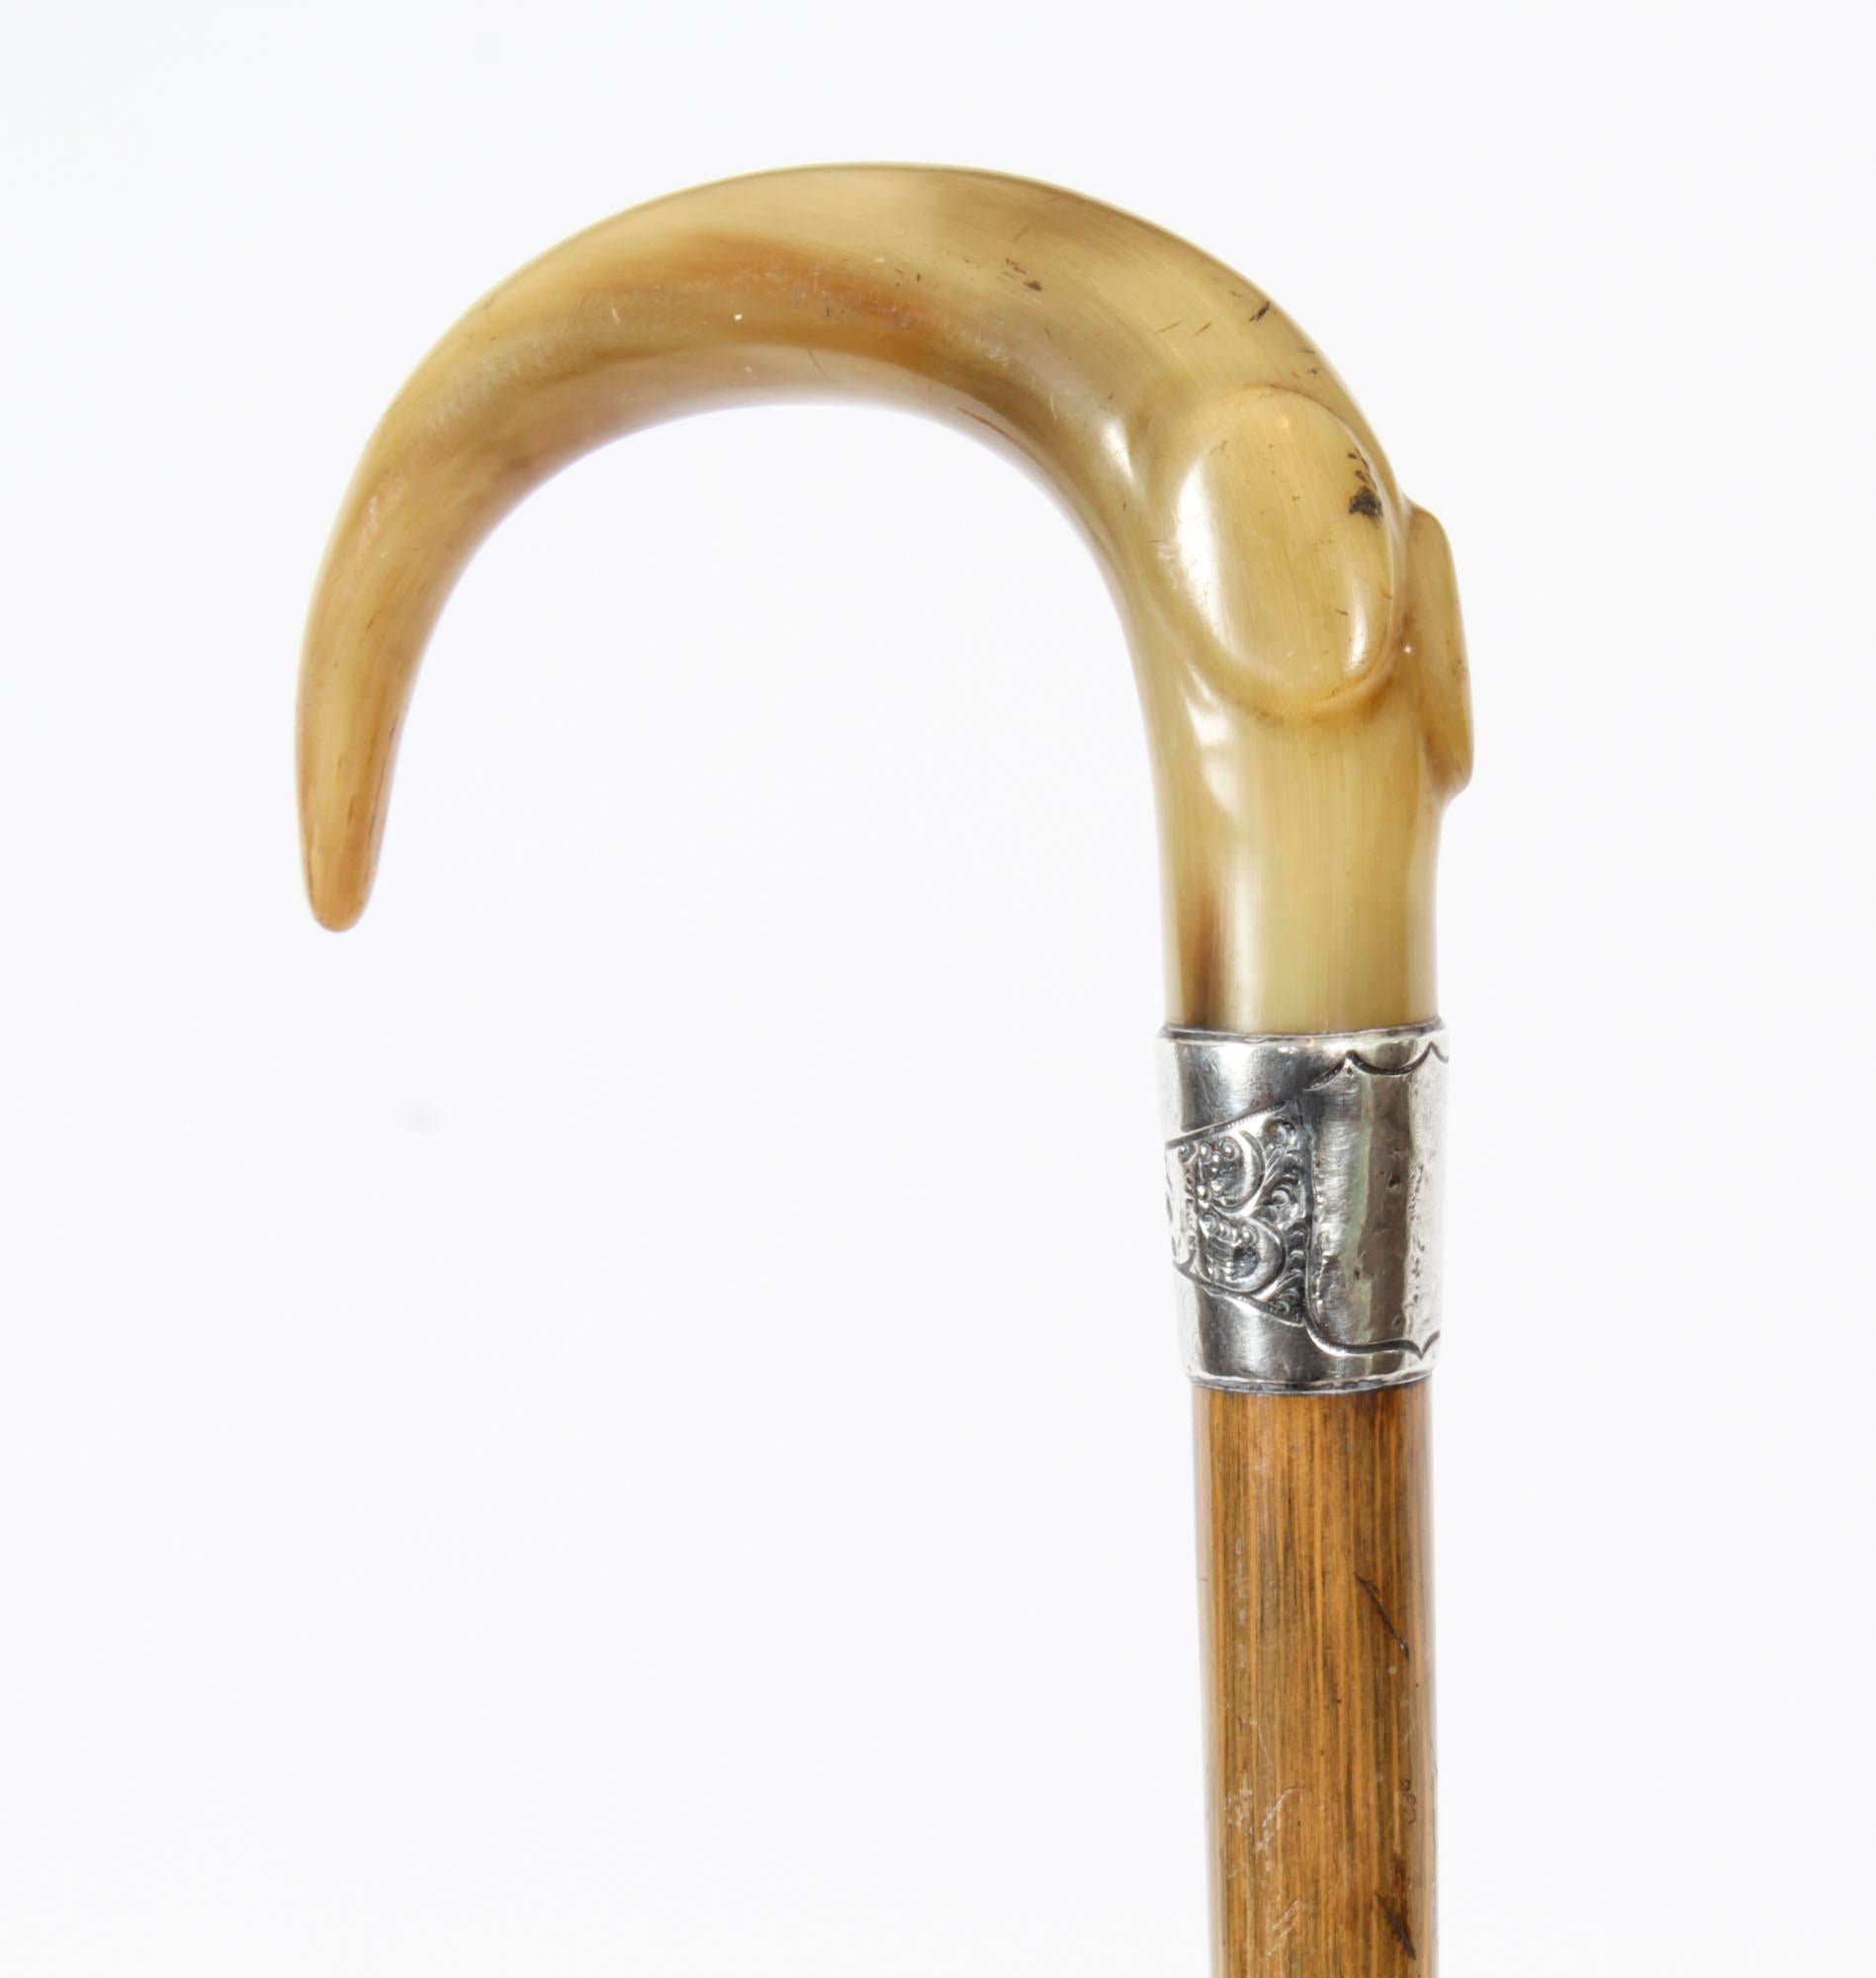 This is a beautiful antique Victorian horn handled walking stick, circa 1870 in date.
 
The handle is carved in a Shepherds crook shape and features an elegant sterling silver collar. 
The sturdy oak tapering shaft features its original brass